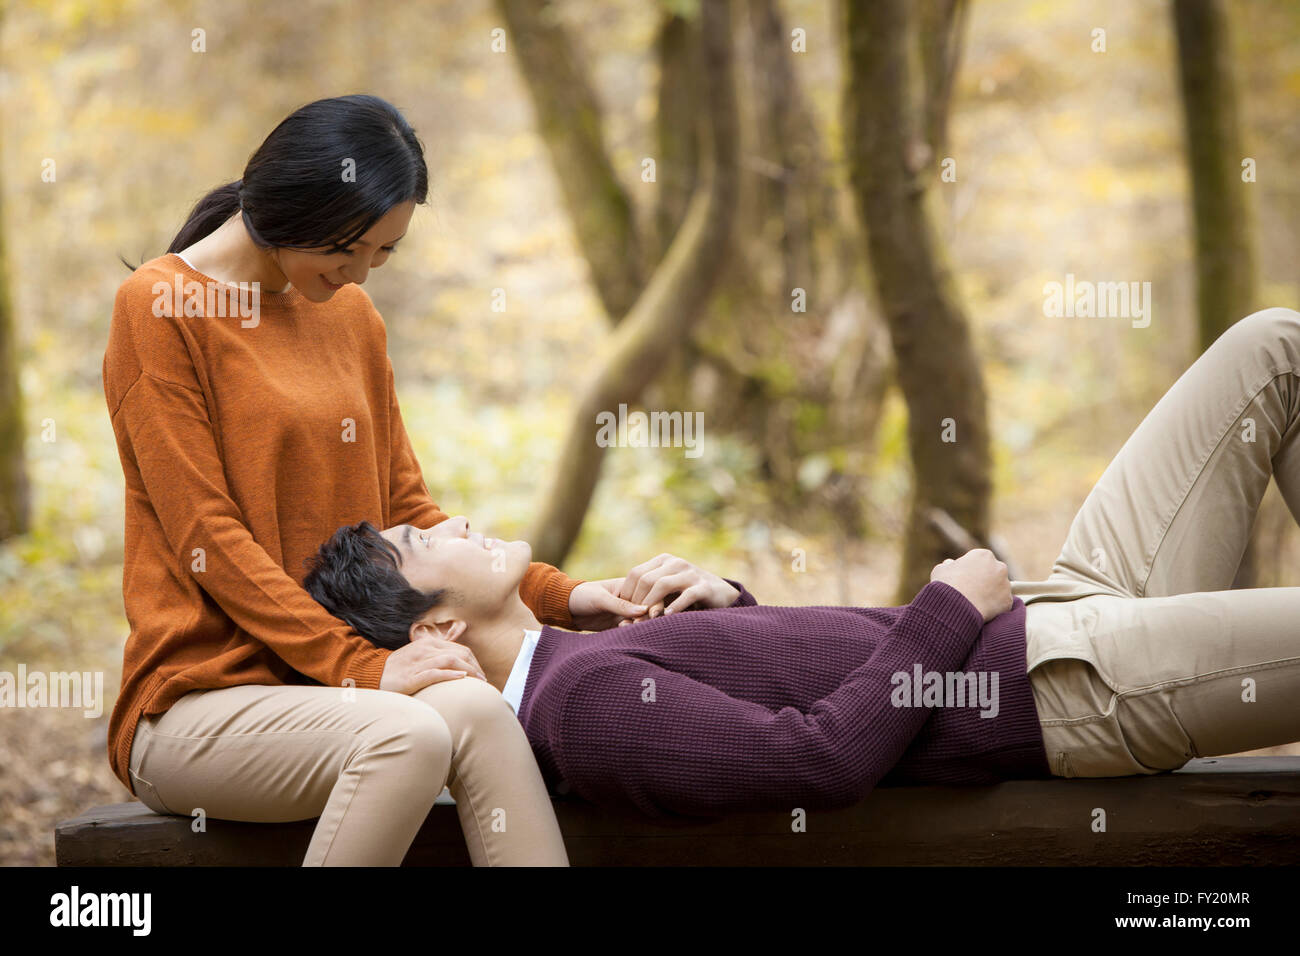 Woman seated on a bench and a man lying on her lap looking at her at the forest in fall Stock Photo